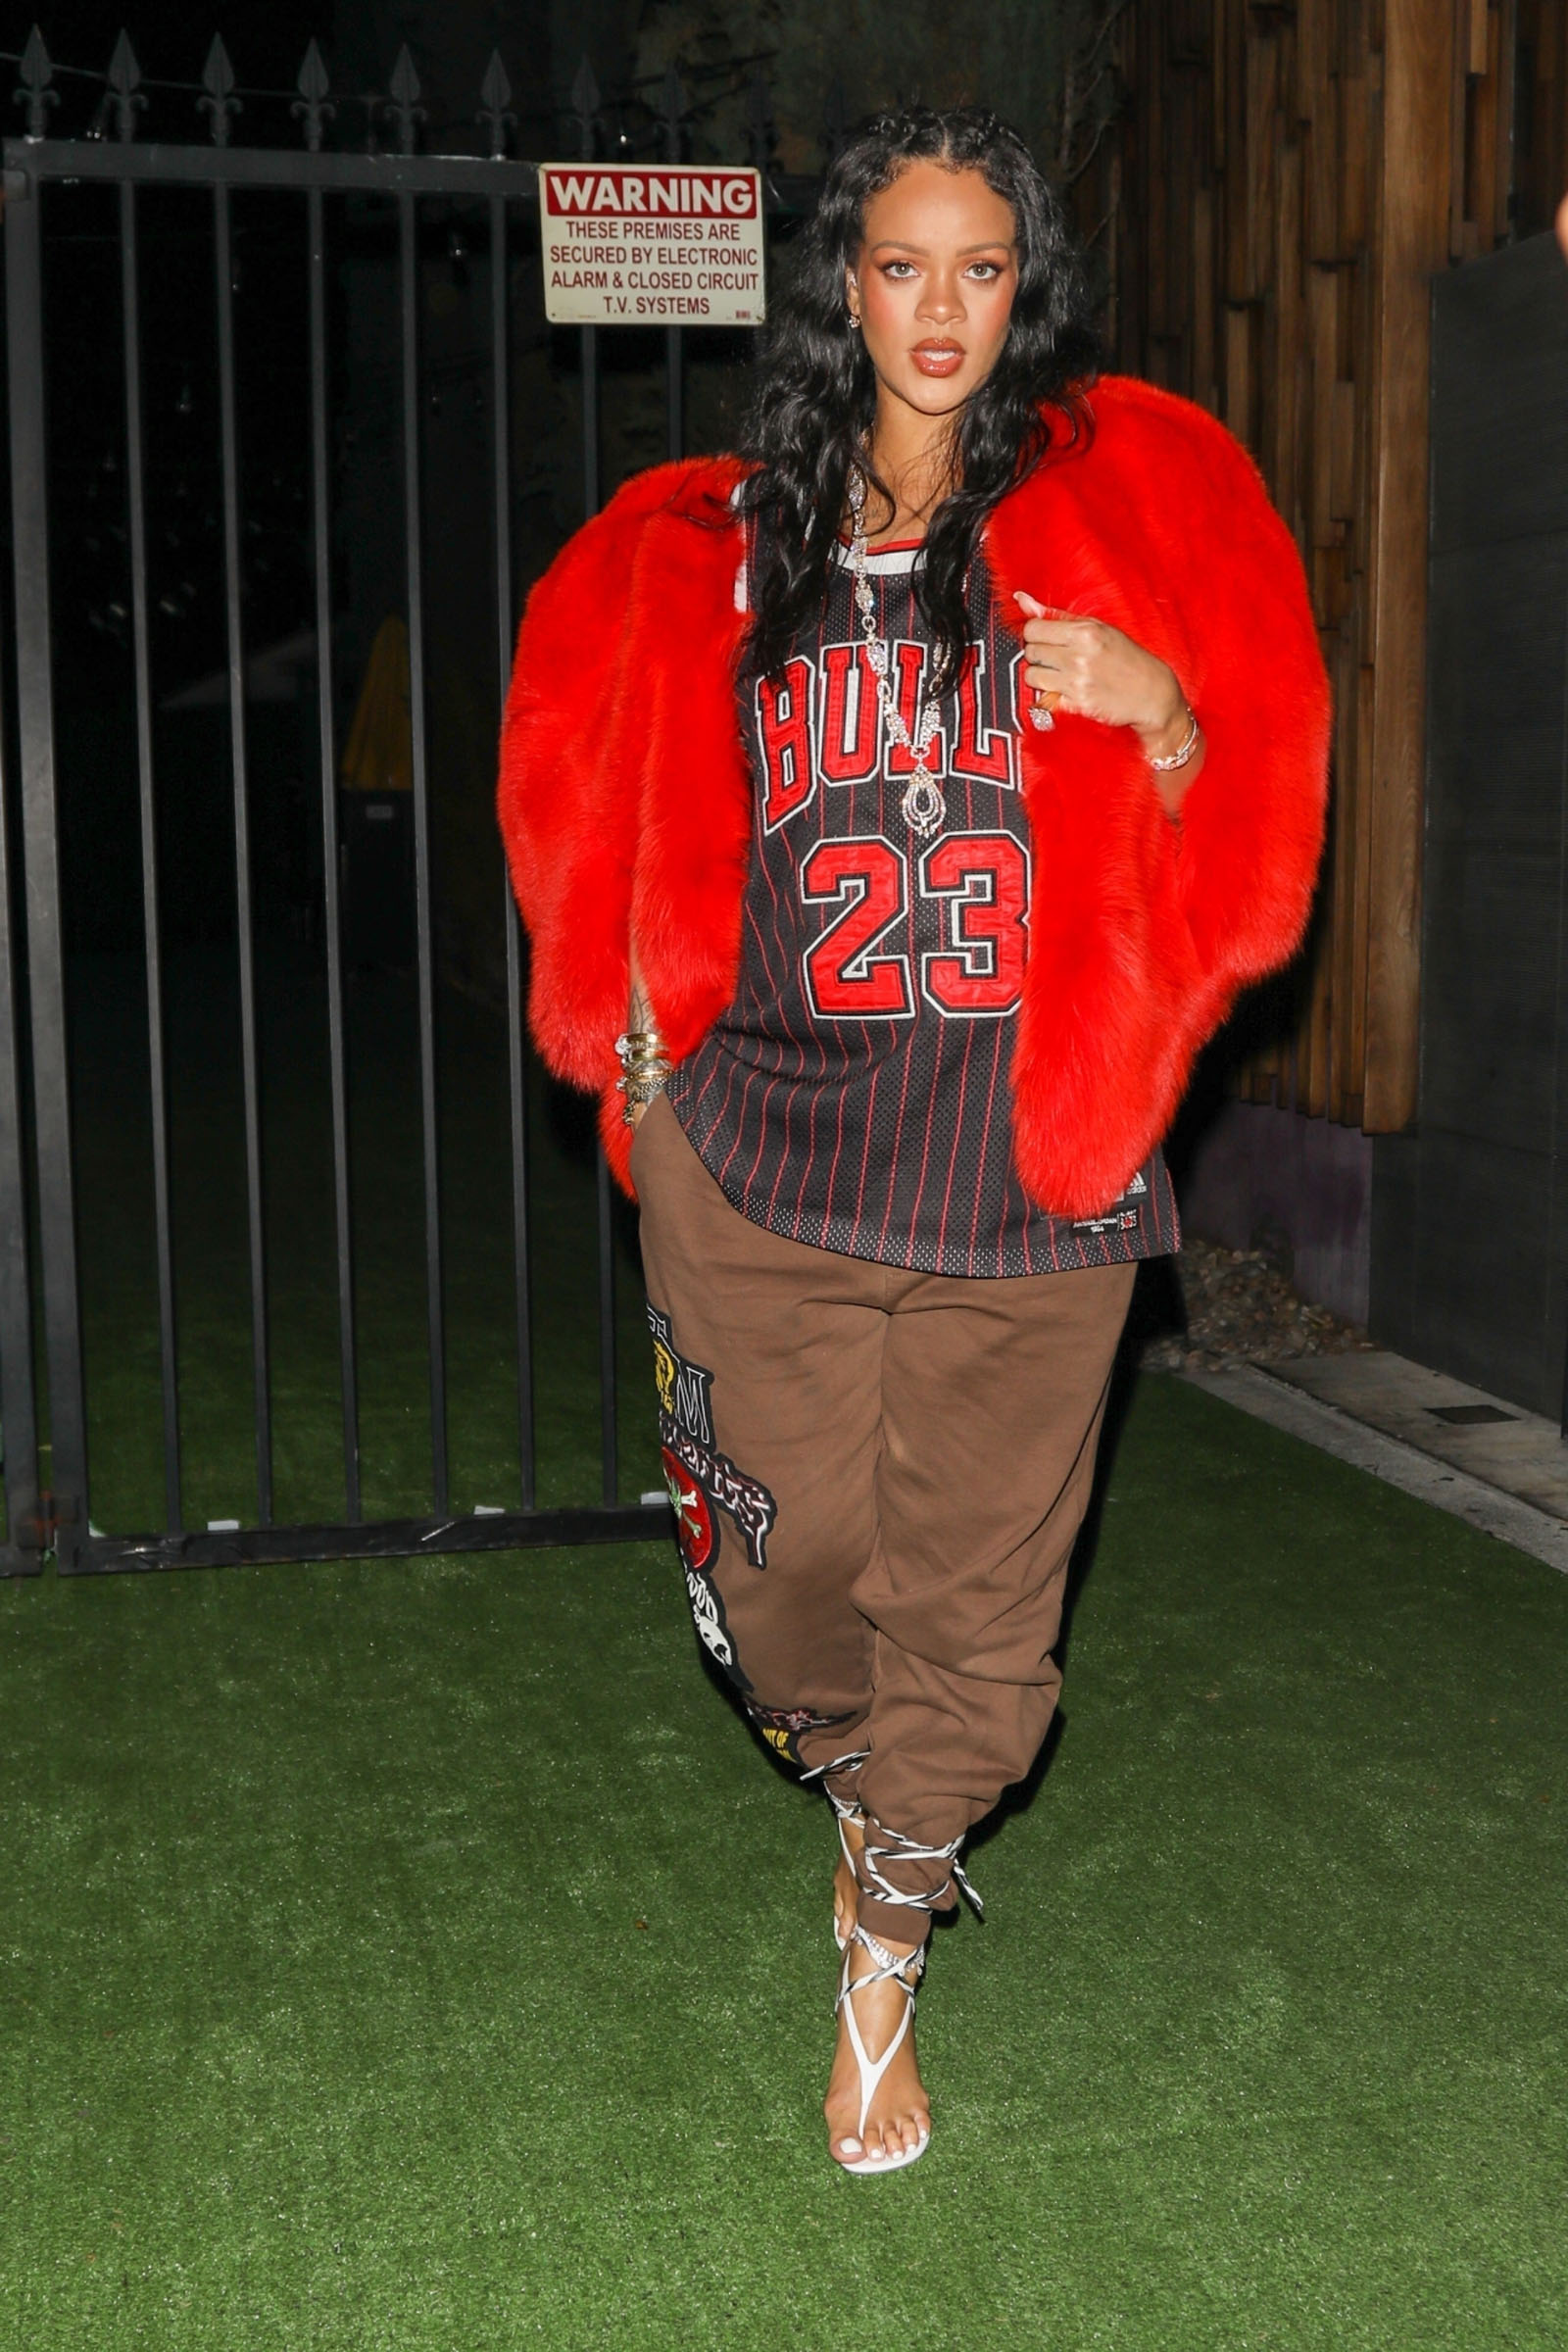 *EXCLUSIVE* Pregnant Rihanna wears a Chicago Bulls jersey while out to dinner